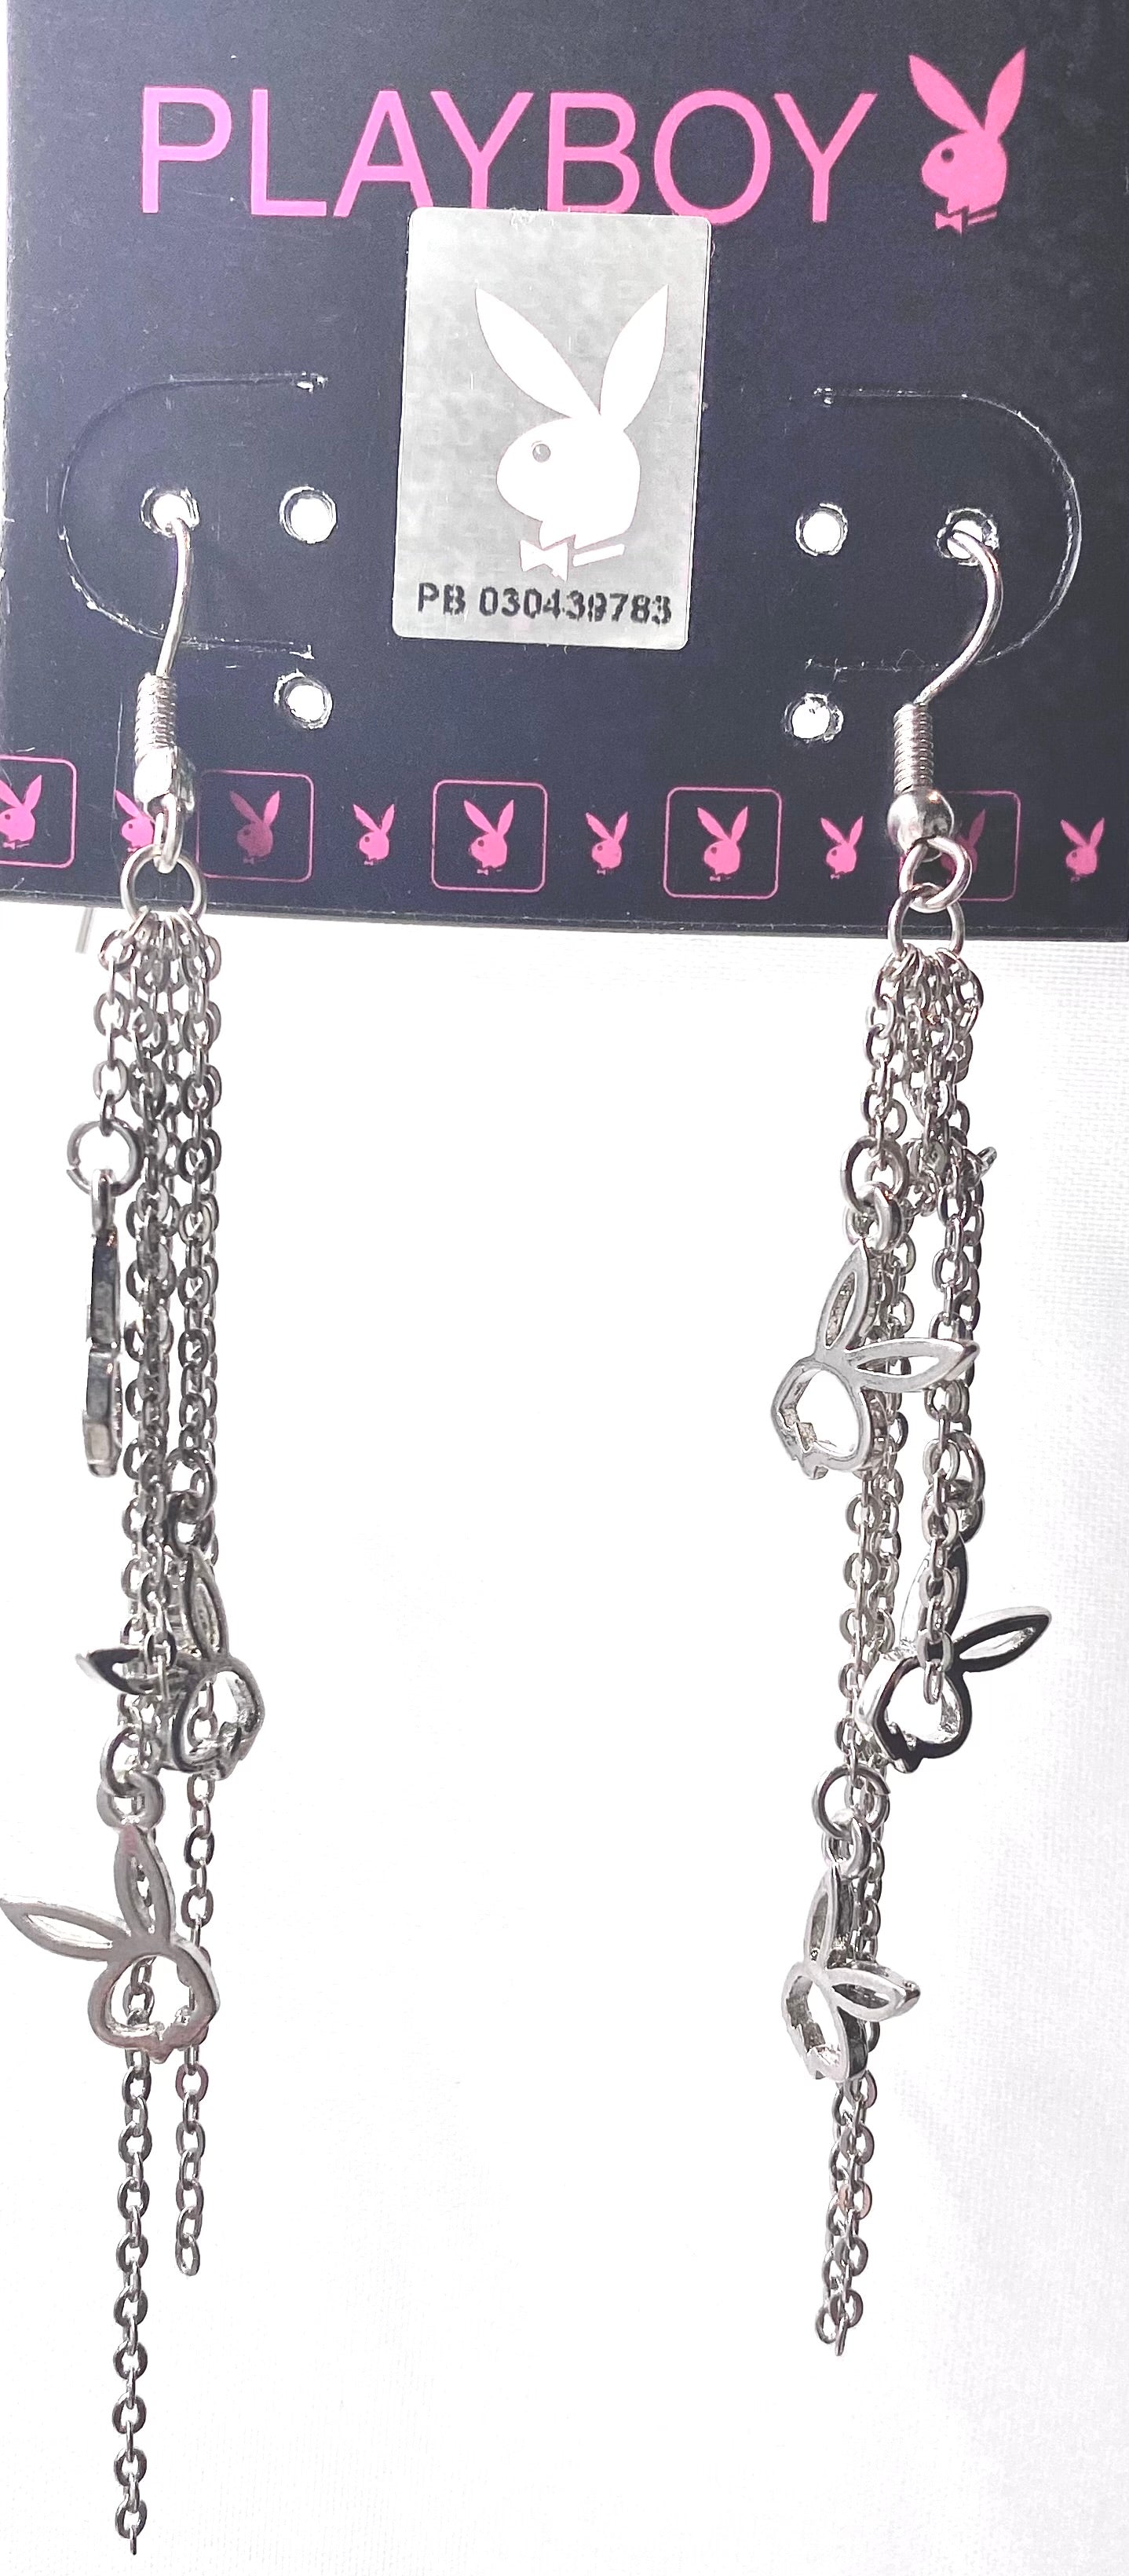 Playboy Hanging Bunny Heads on a chain